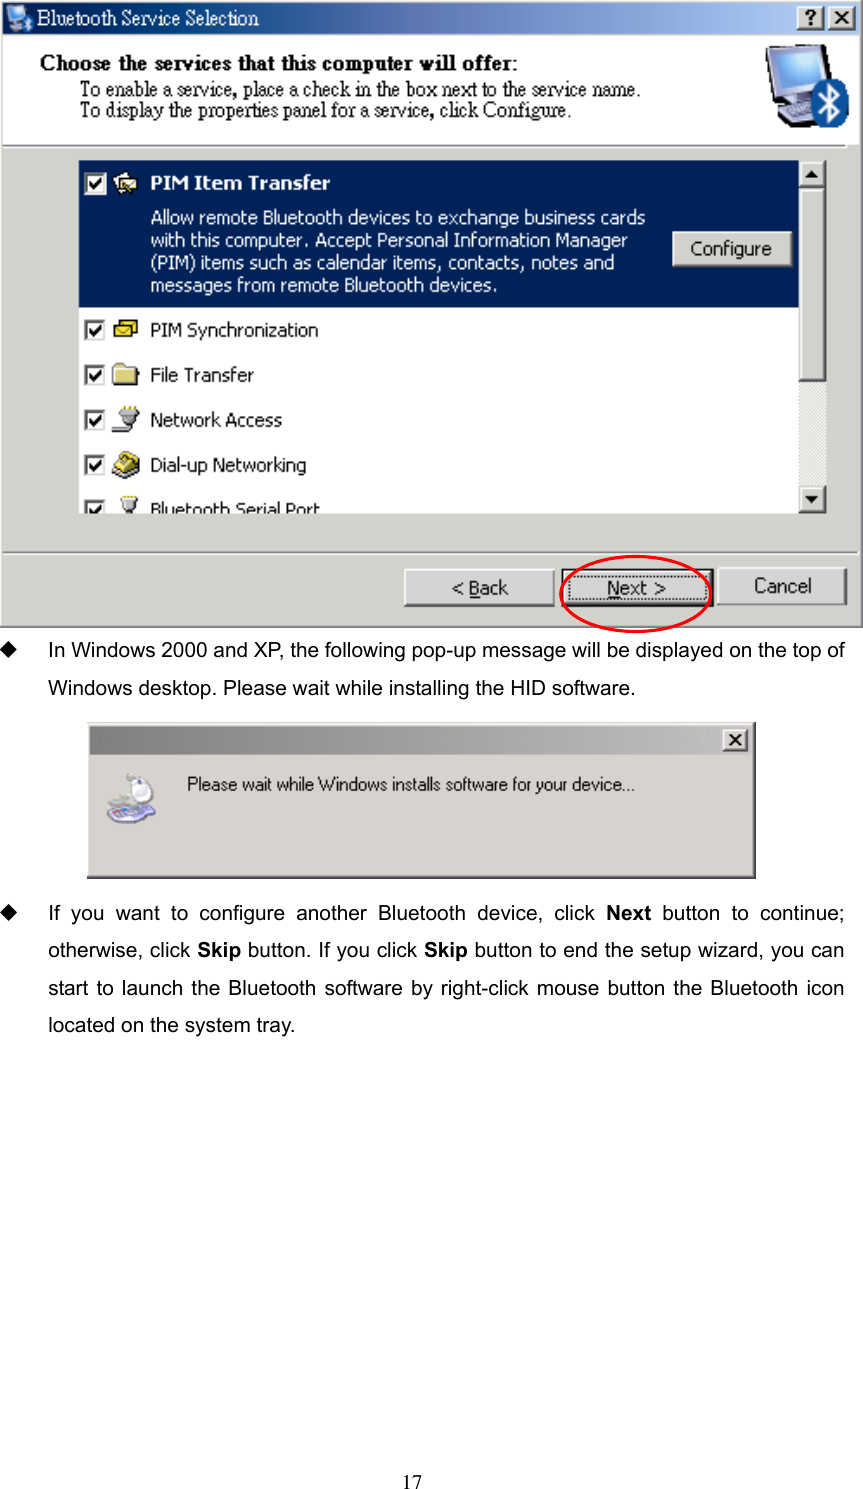    In Windows 2000 and XP, the following pop-up message will be displayed on the top of Windows desktop. Please wait while installing the HID software.    If you want to configure another Bluetooth device, click Next button to continue; otherwise, click Skip button. If you click Skip button to end the setup wizard, you can start to launch the Bluetooth software by right-click mouse button the Bluetooth icon located on the system tray.  17 